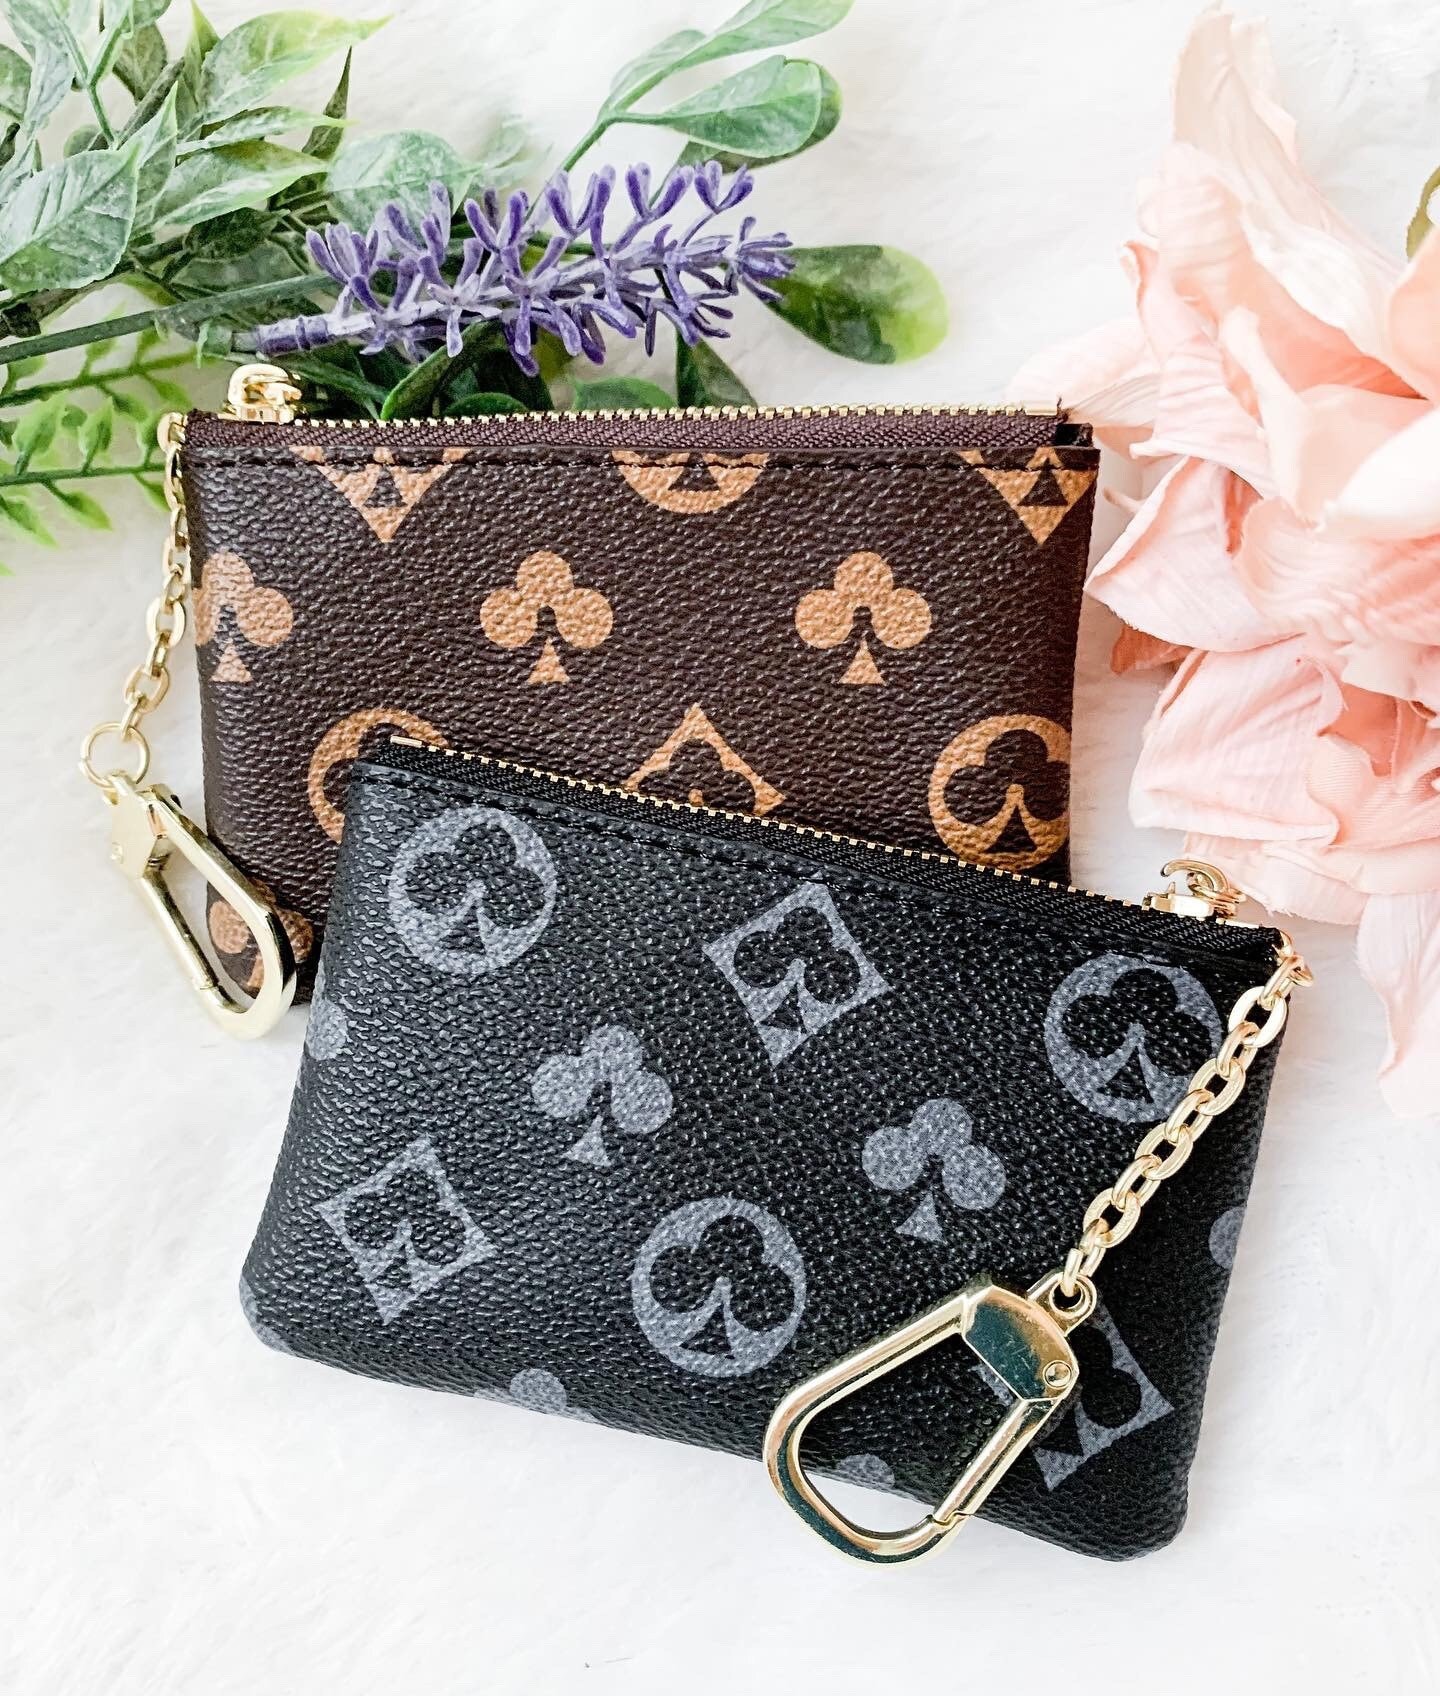 lv coin purse with chain